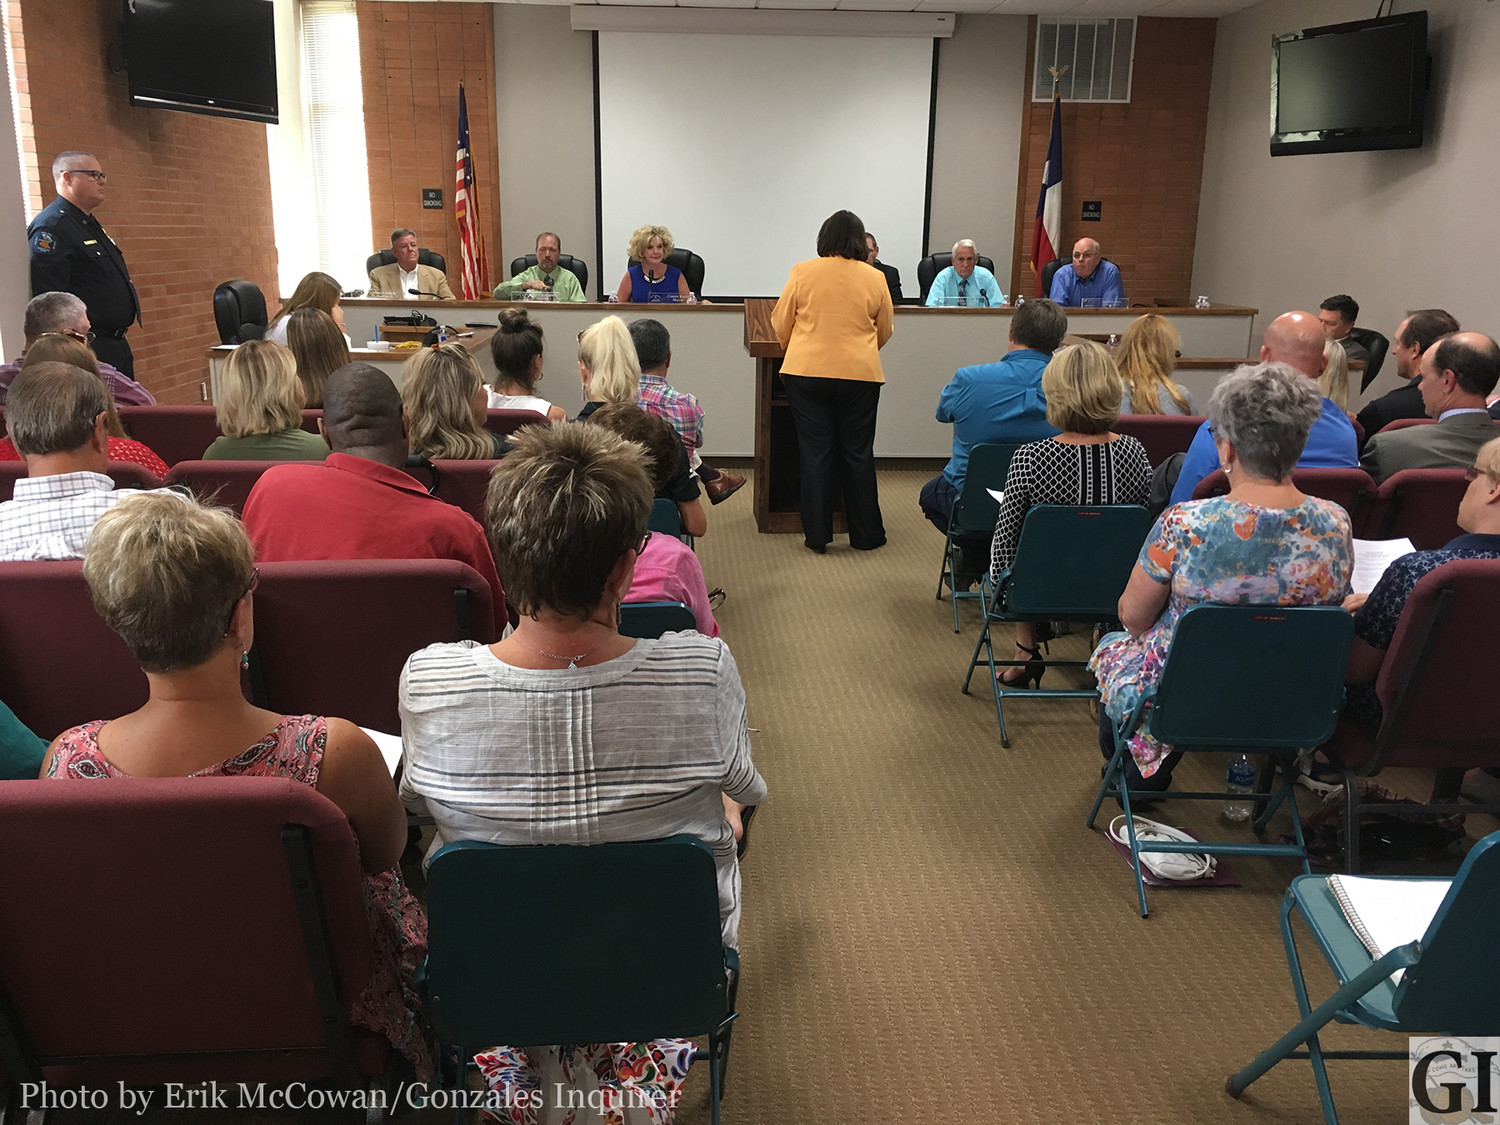 Last Thursday's Gonzales city council meeting was quite the show, with over an hour dedicated to public comments and much more given to hammering out a lease agreement between the city and the Victoria College-Gonzales Center campus. Here, Campus Manager Jackie Mikesh takes the podium to start the public comments section as council looks on.